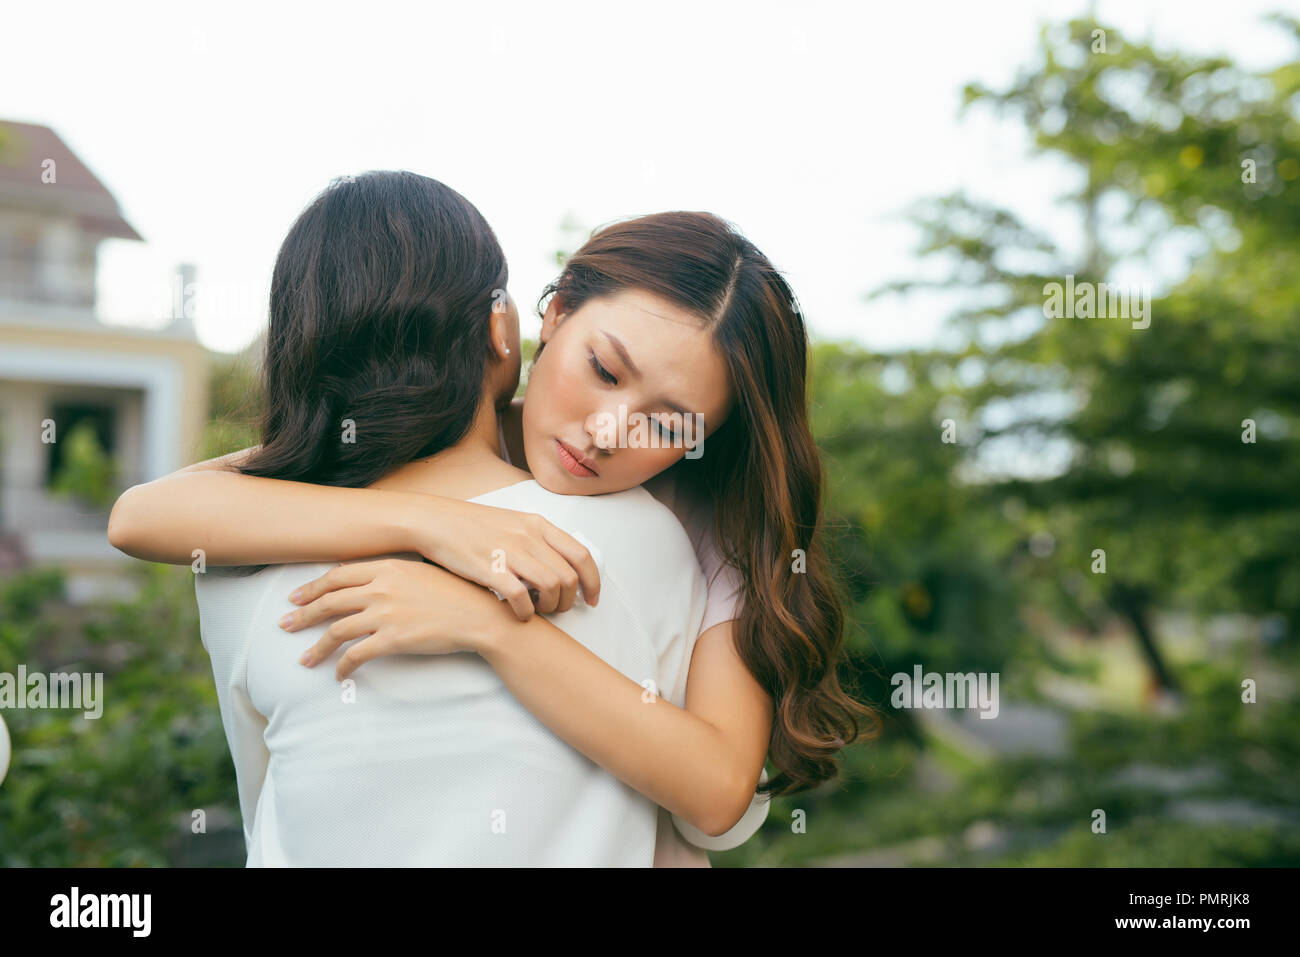 Portrait two women. Sad unhappy young woman being consoled by her friend. Friendship help support and difficult times concept. Human emotions feelings Stock Photo